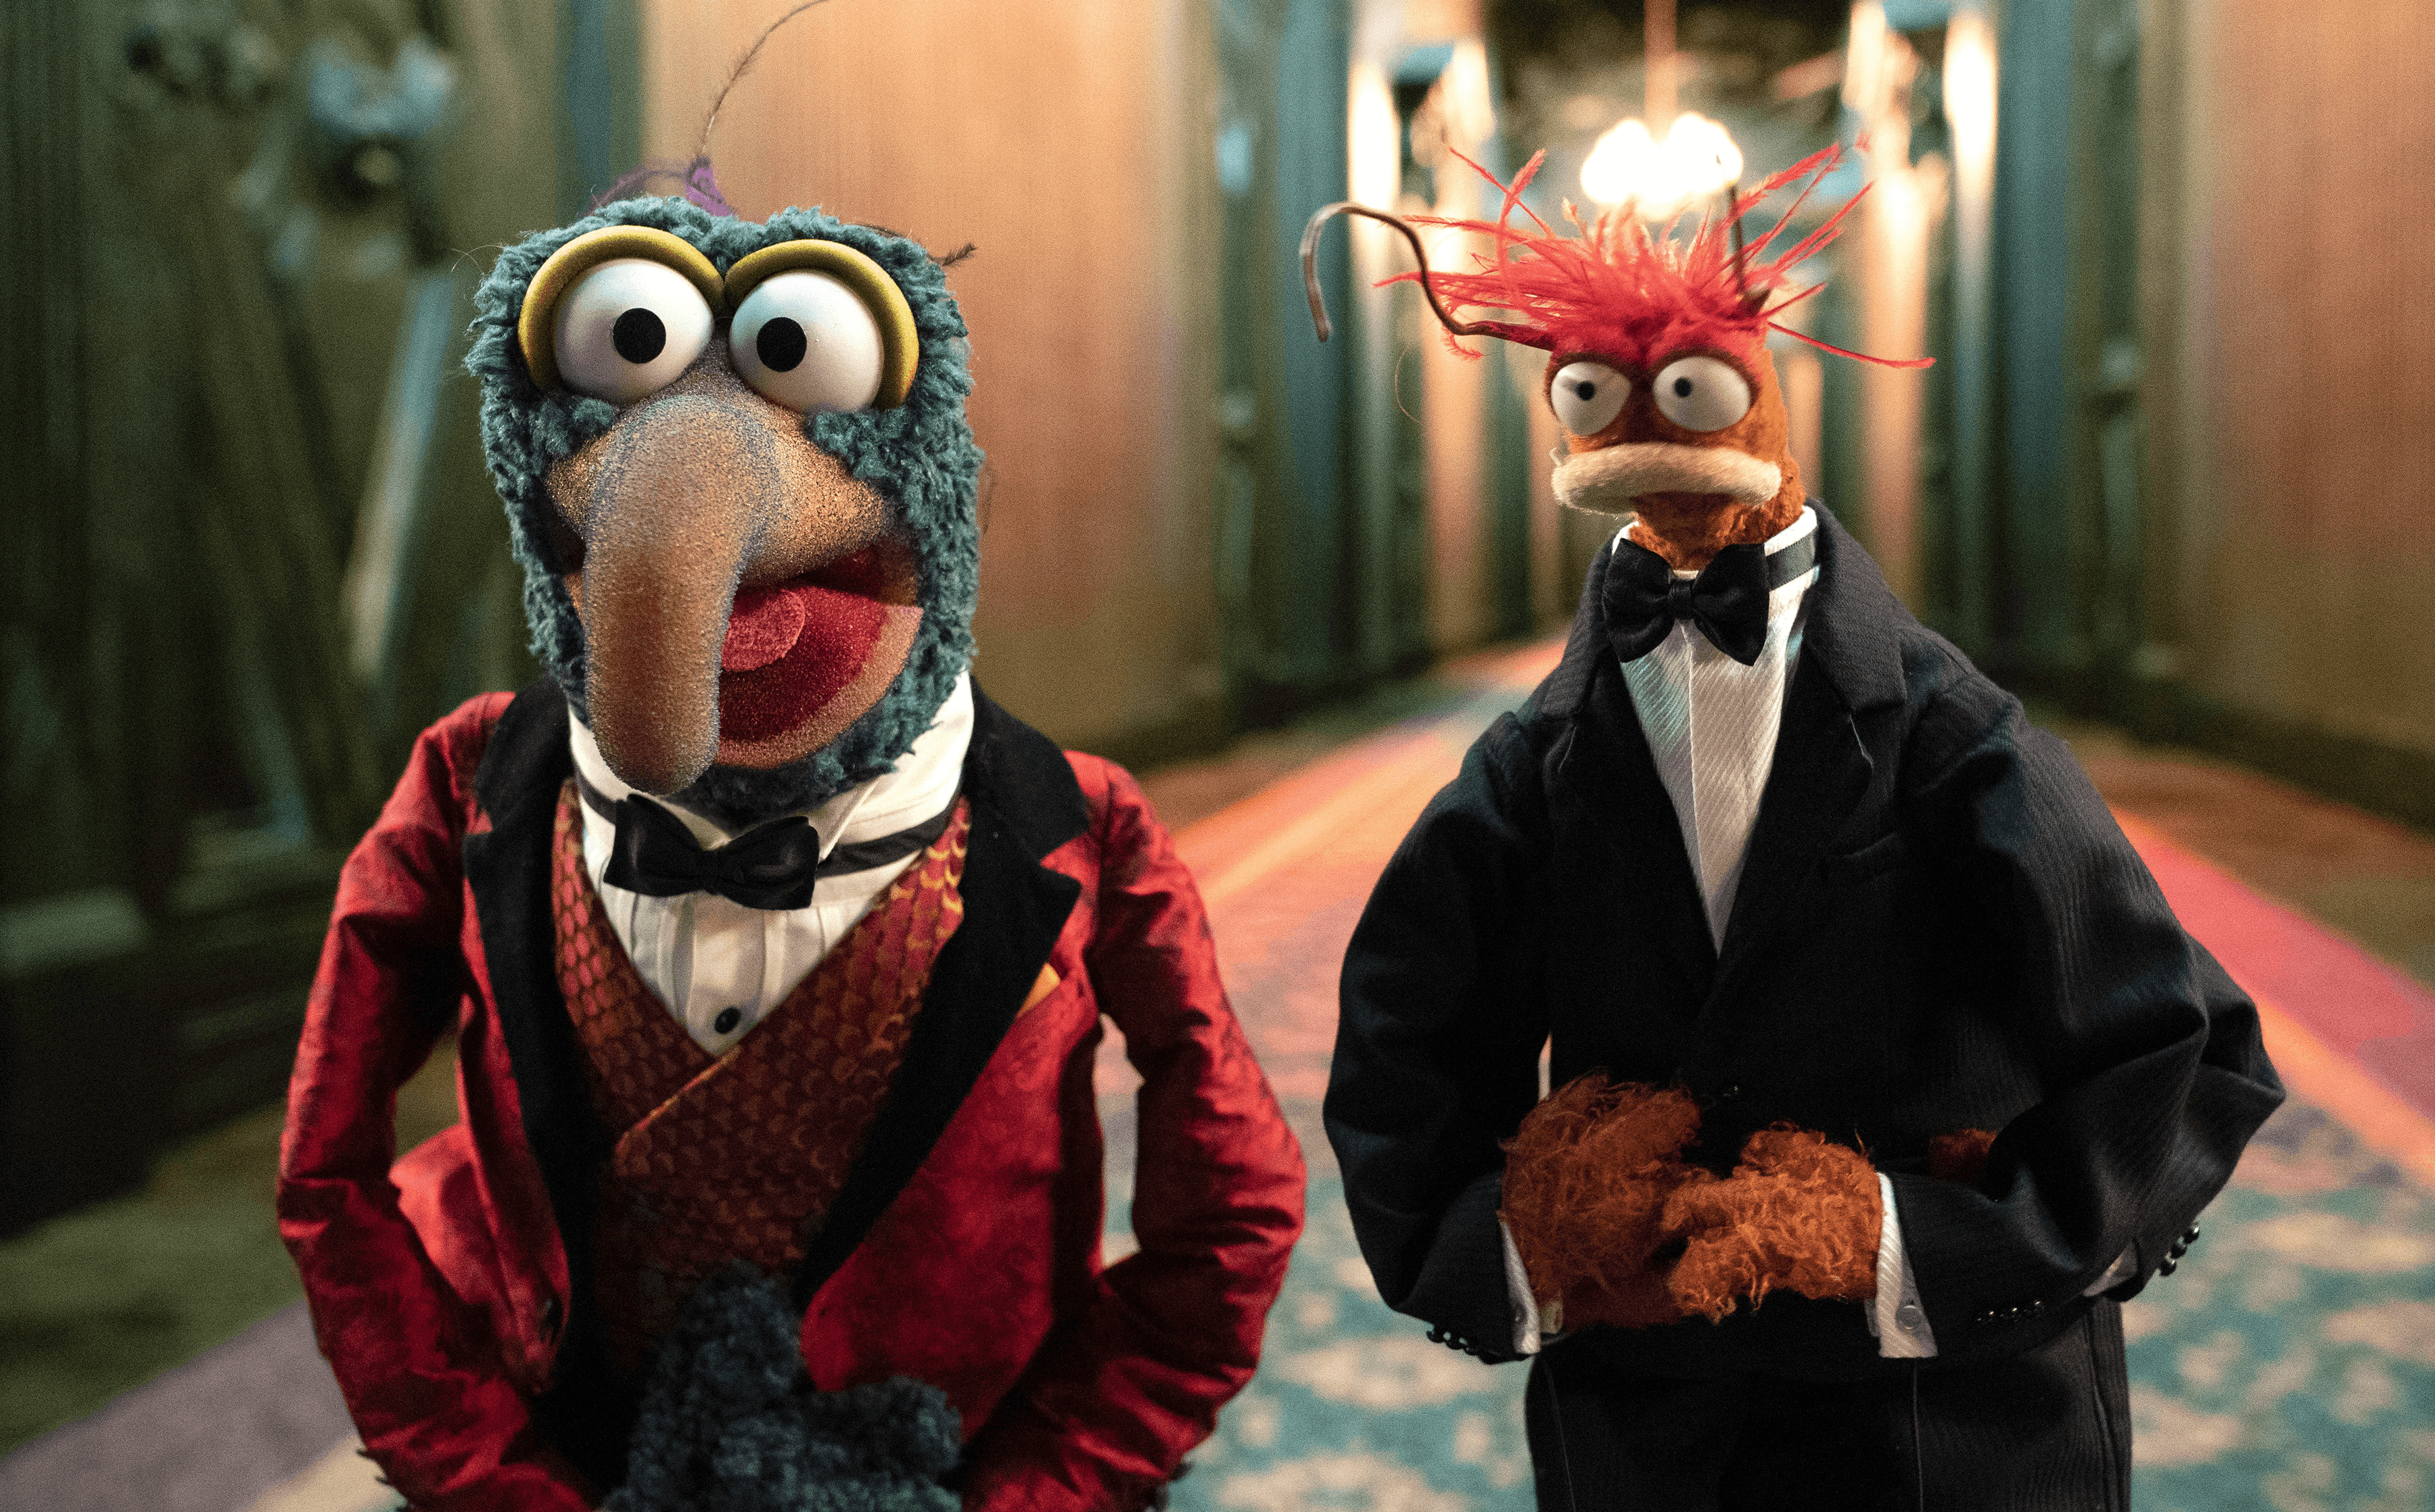 Muppets Haunted Mansion Comes to Disney+ October 8: Watch the New Trailer Now